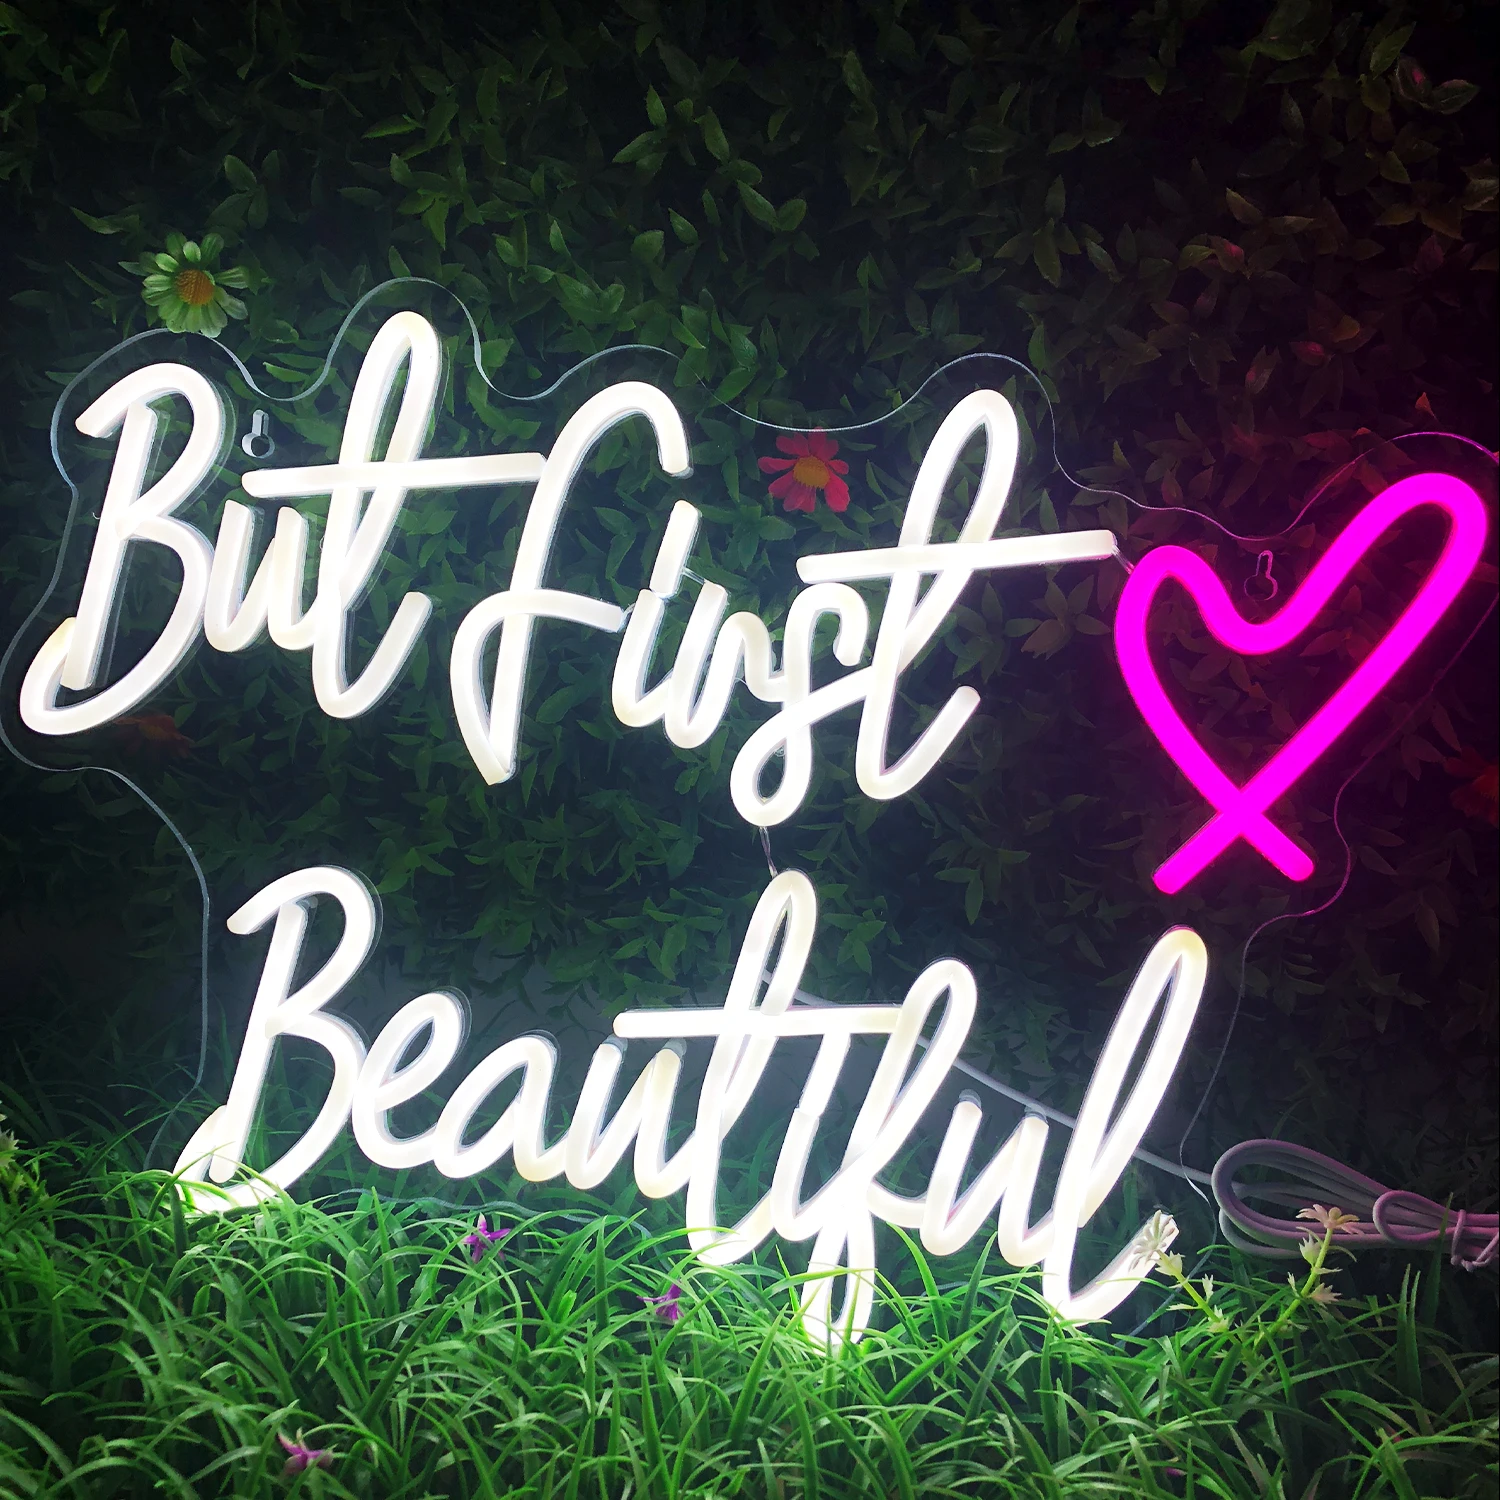 But First Beautiful Neon Signs with Love Wall Signs Led Neon Light up Lamp for Wedding Party Birthday Gifts Bar Girls Room Decor